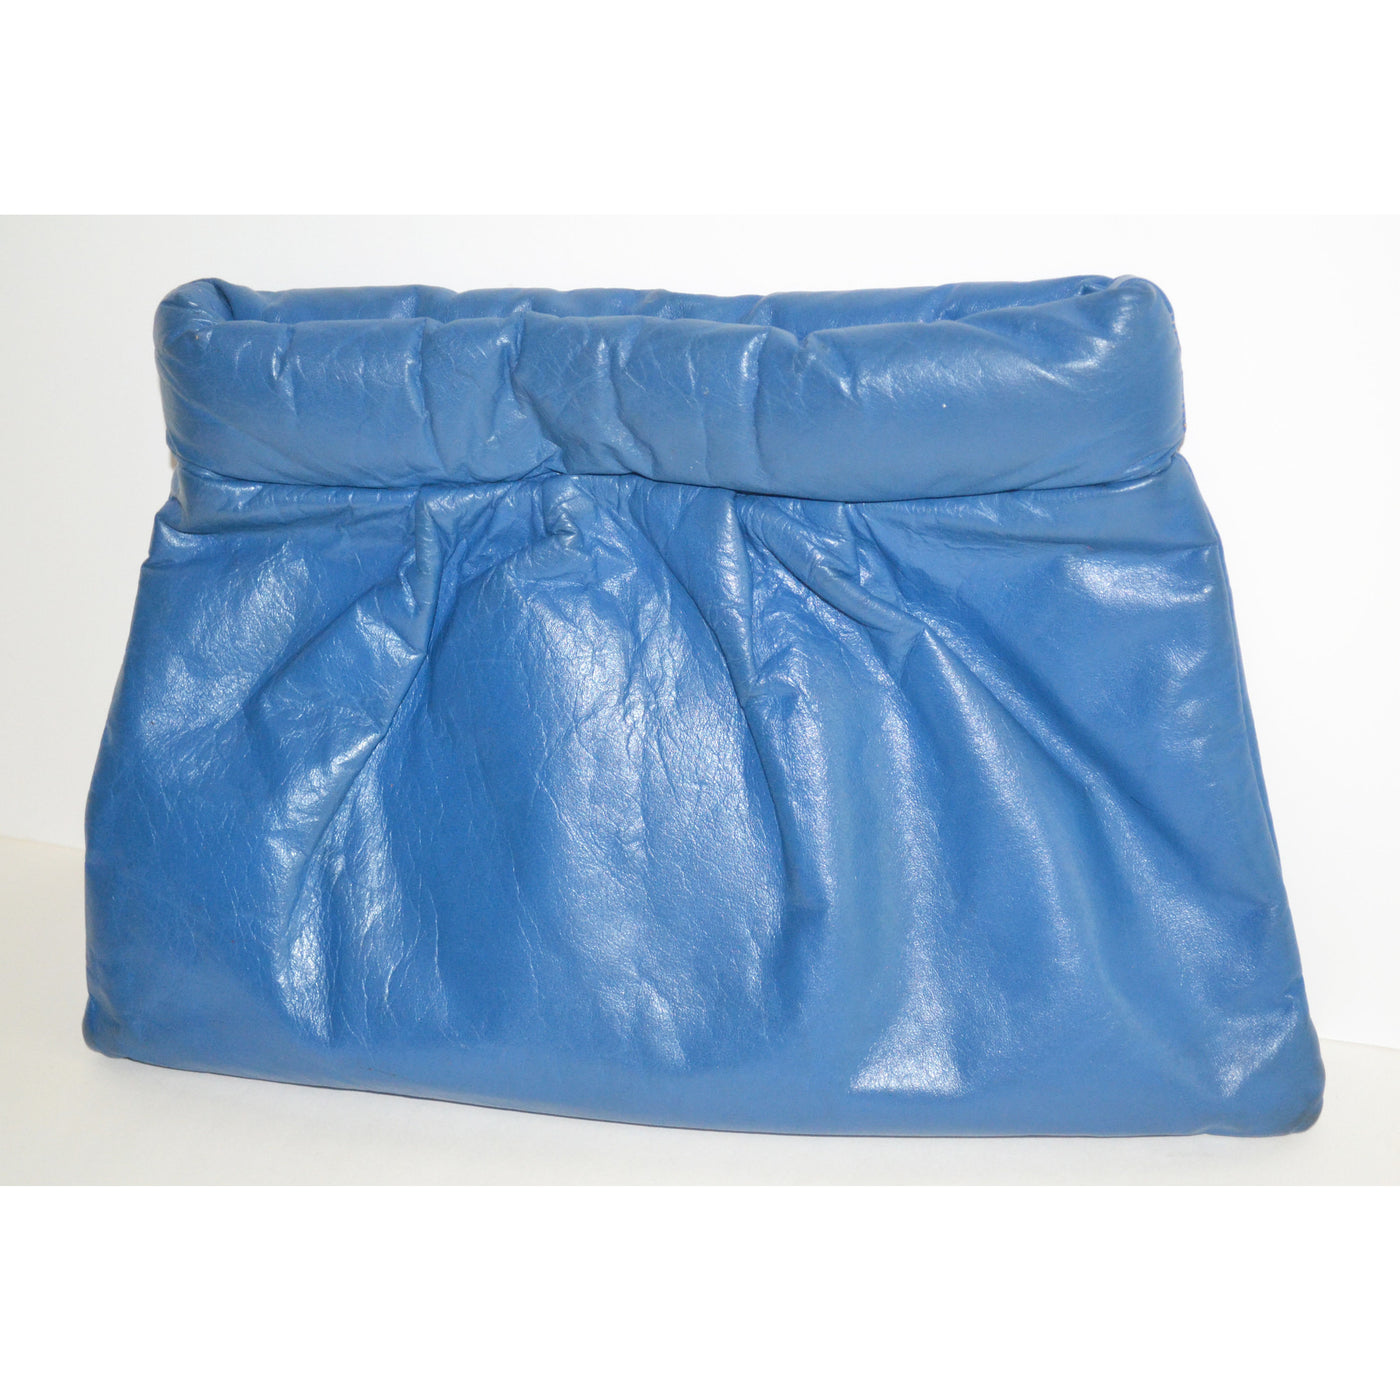 Vintage Blue Pleated Leather Clutch Purse